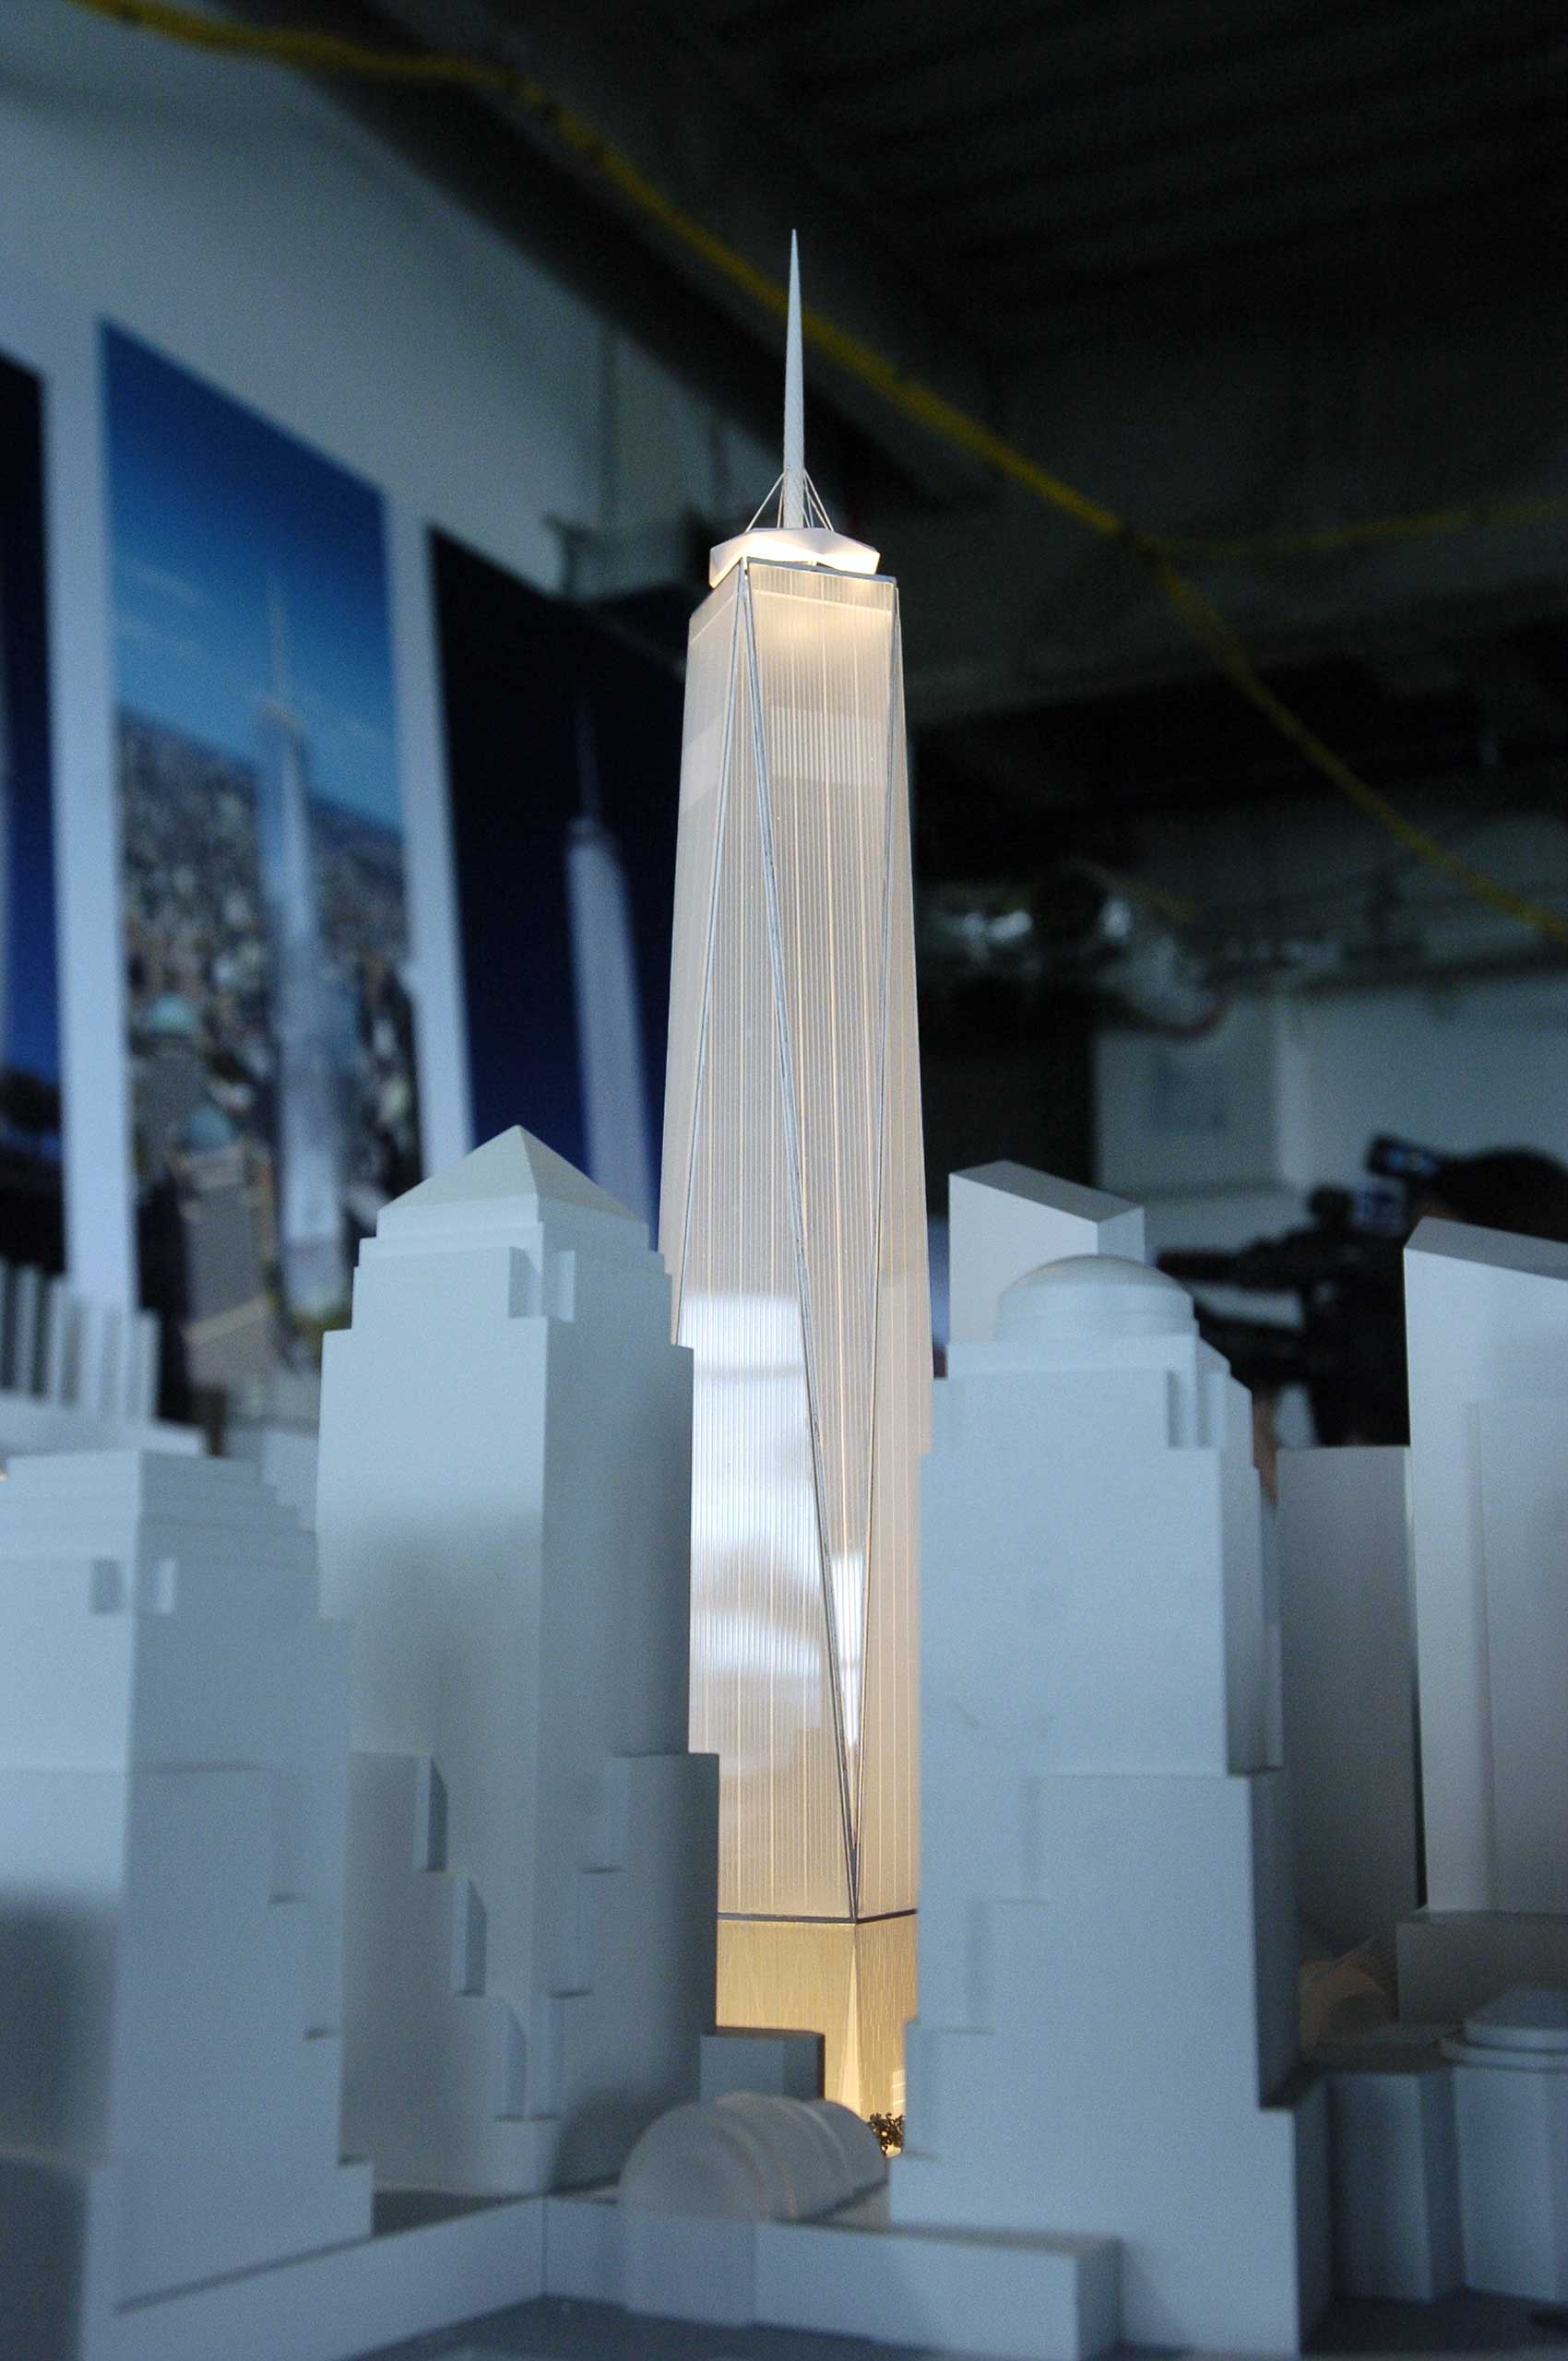 A model of the Freedom Tower, incorporating the newest desig